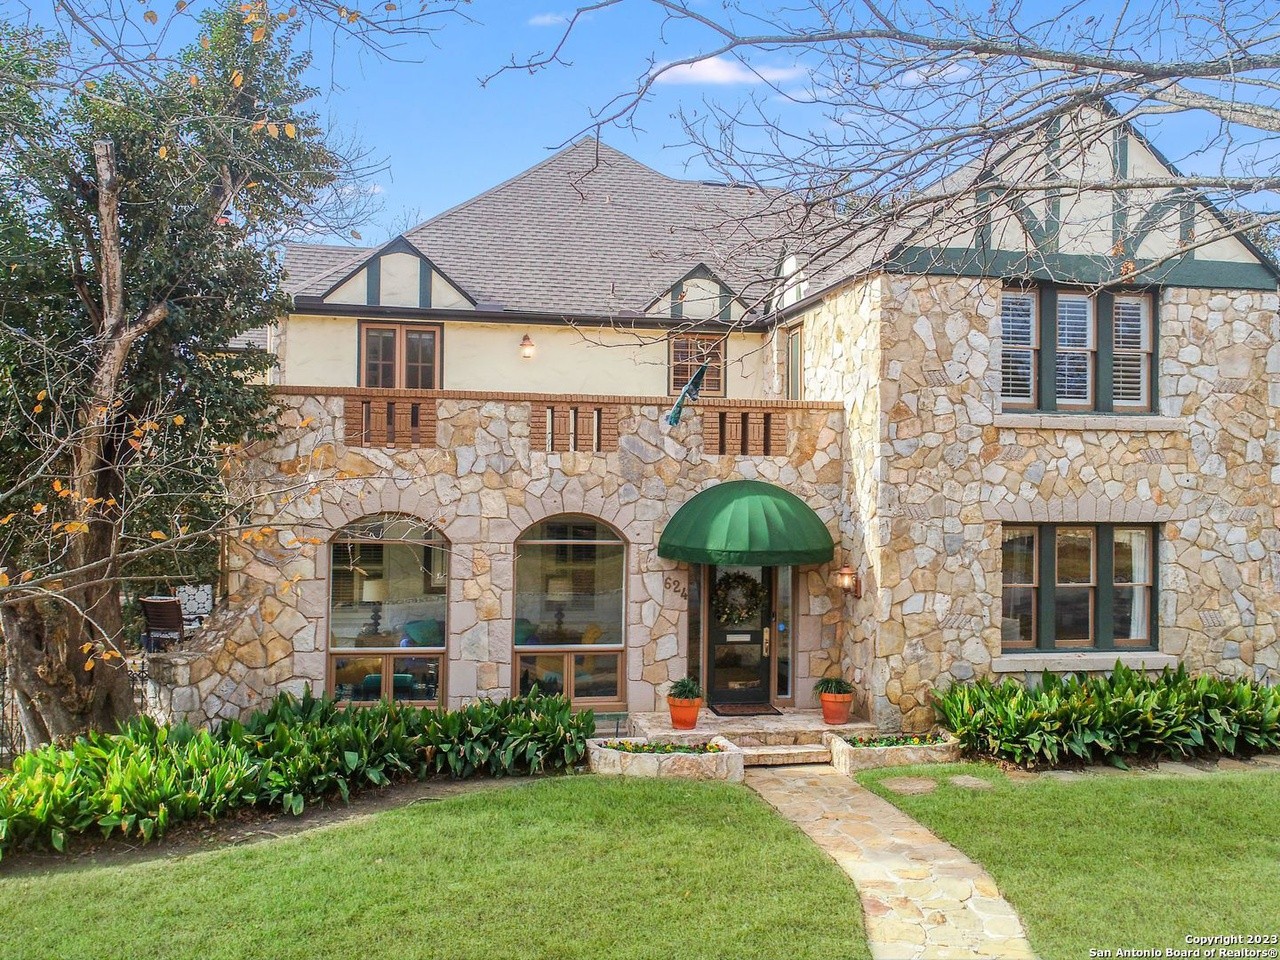 A stone mansion in San Antonio's Olmos Park area with 3 second-floor balconies is now for sale